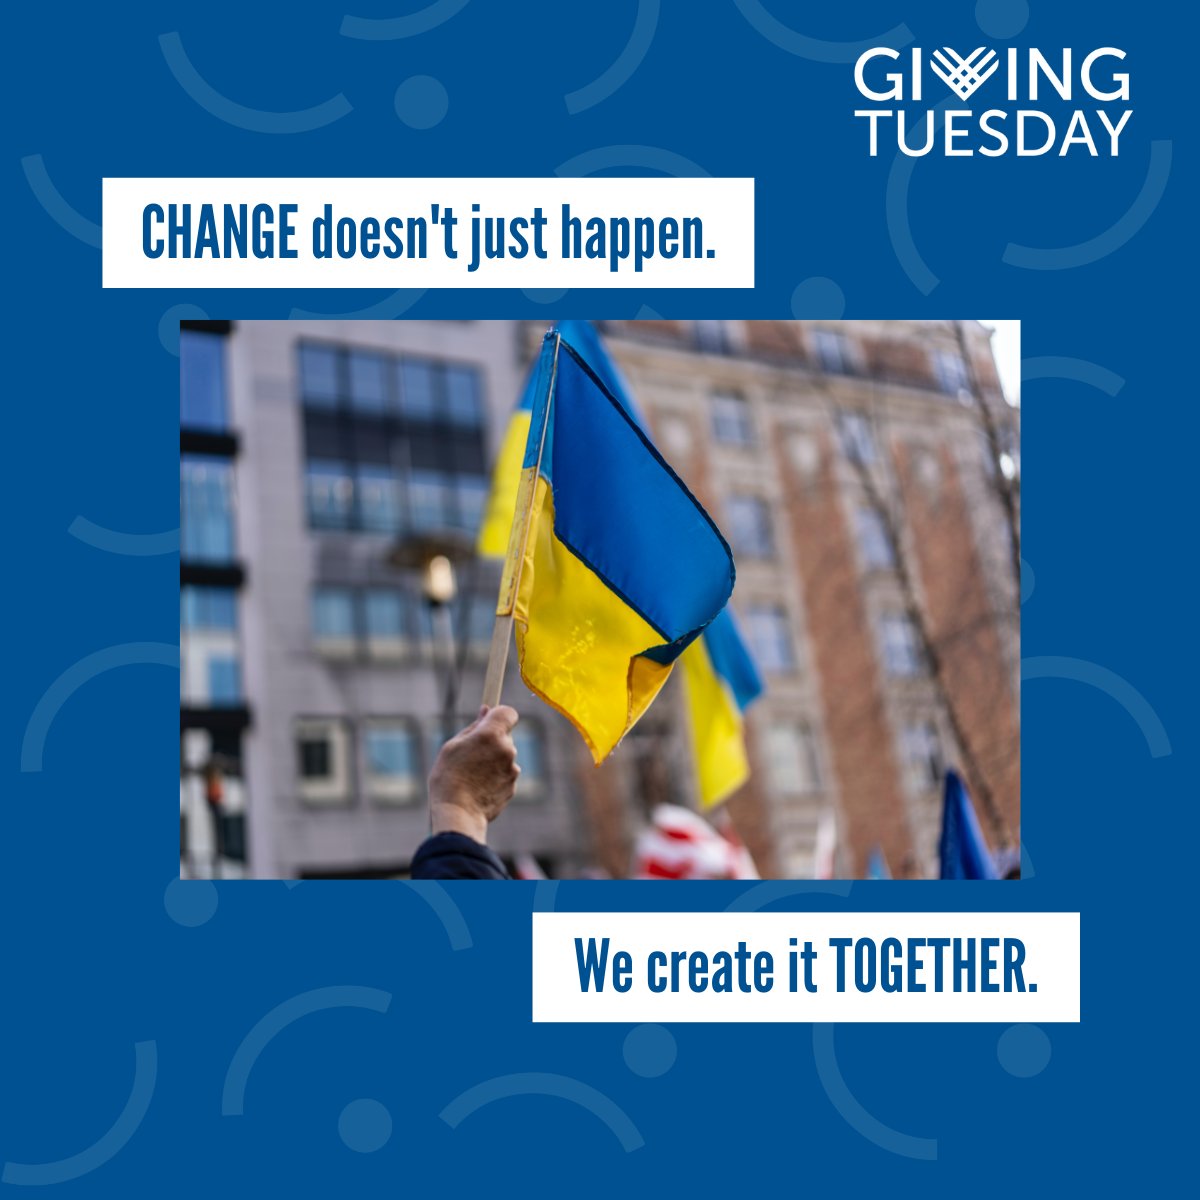 In case you missed it, we're supporting @UnitedWayUK for @GivingTuesdayUK 

Helping Ukrainian refugees, every pound donated could make a life-changing difference to someone in need. To donate to this great cause, click here: https://t.co/5oHVR3RxZx

#TogetherWeMakeChange 